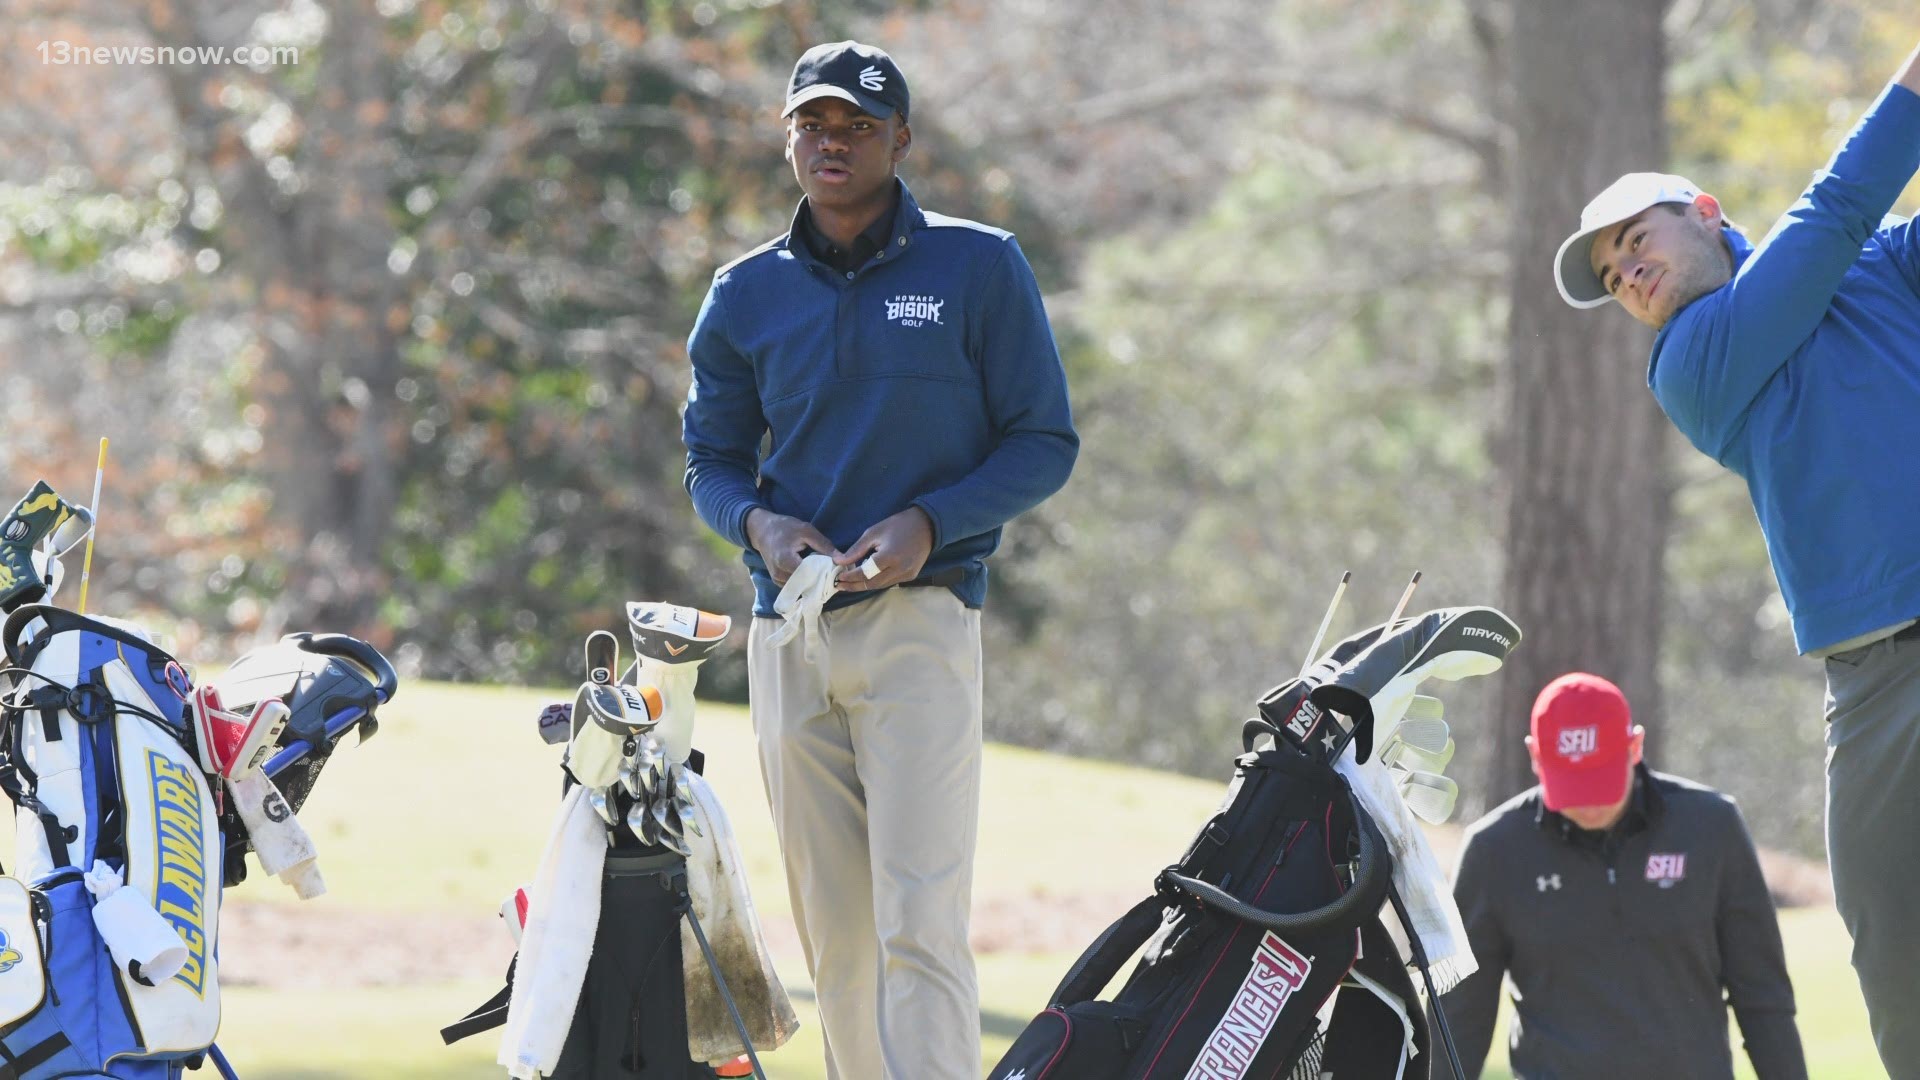 The NBA great is behind the funding for the Howard University golf program and Chesapeake's E.J. Whiten is part of the team.